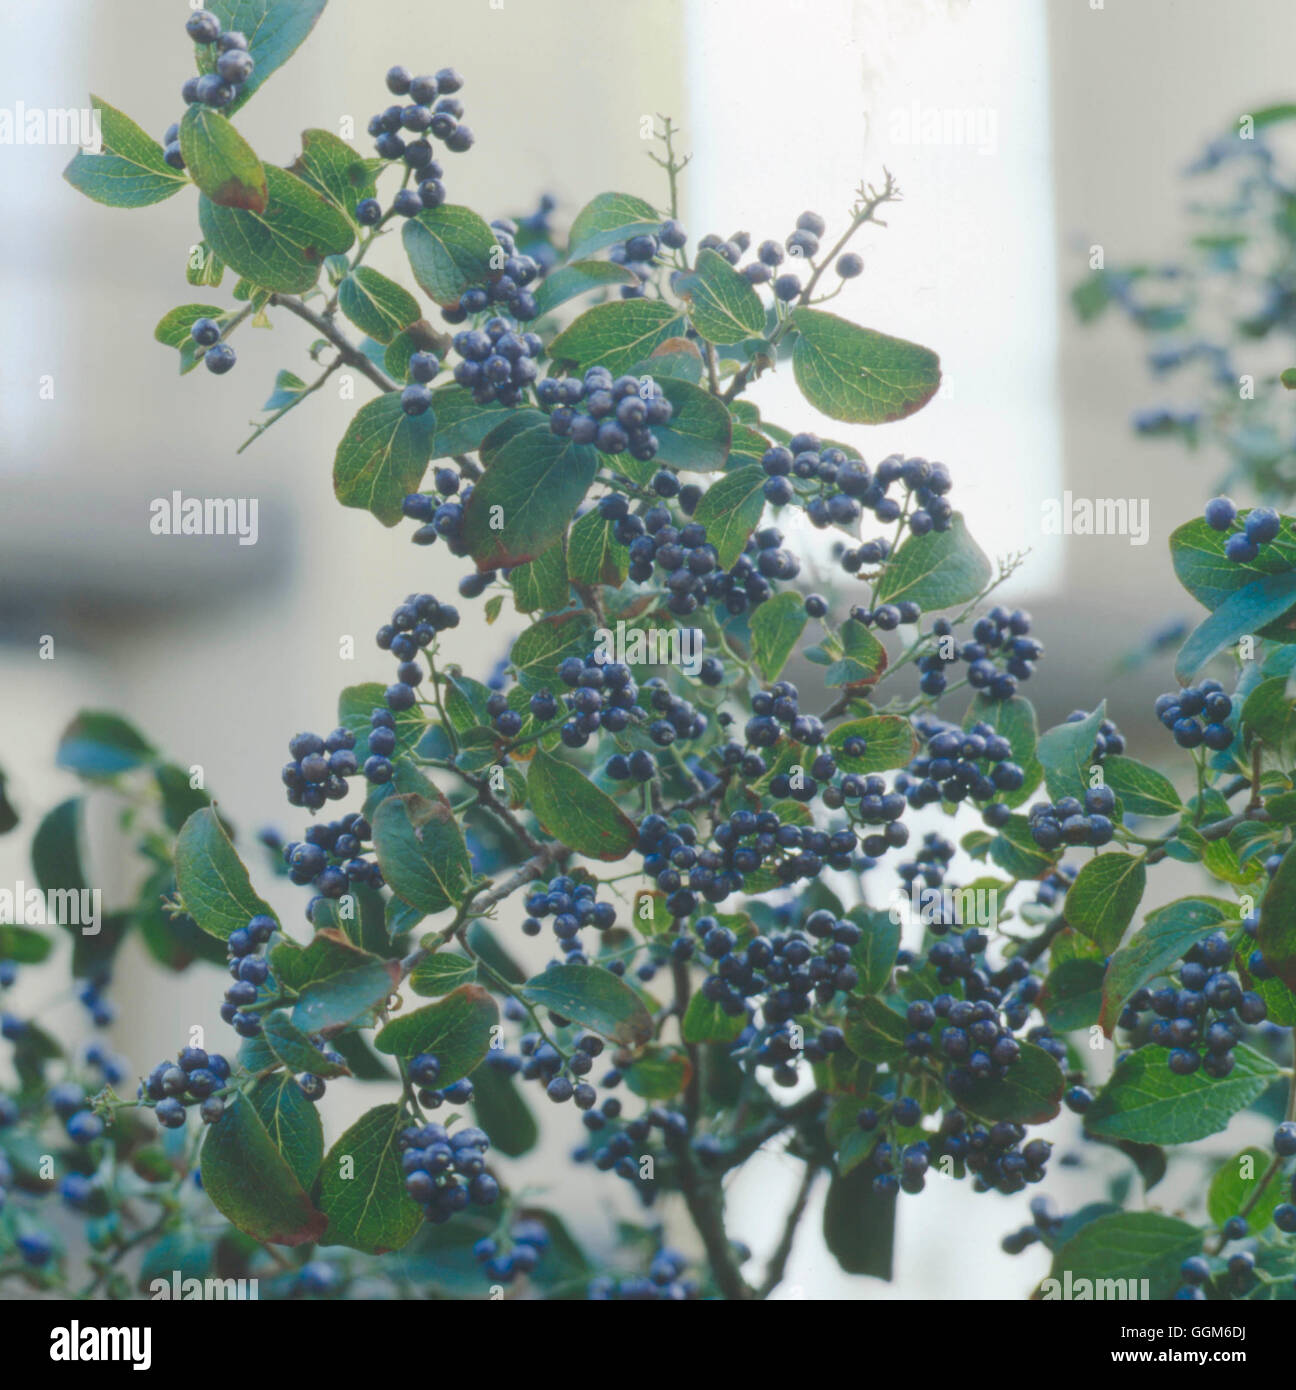 Symplocos paniculata - showing berries- - Sapphire Berry ''Asiatic Sweetleaf'''   TRS000203     P' Stock Photo